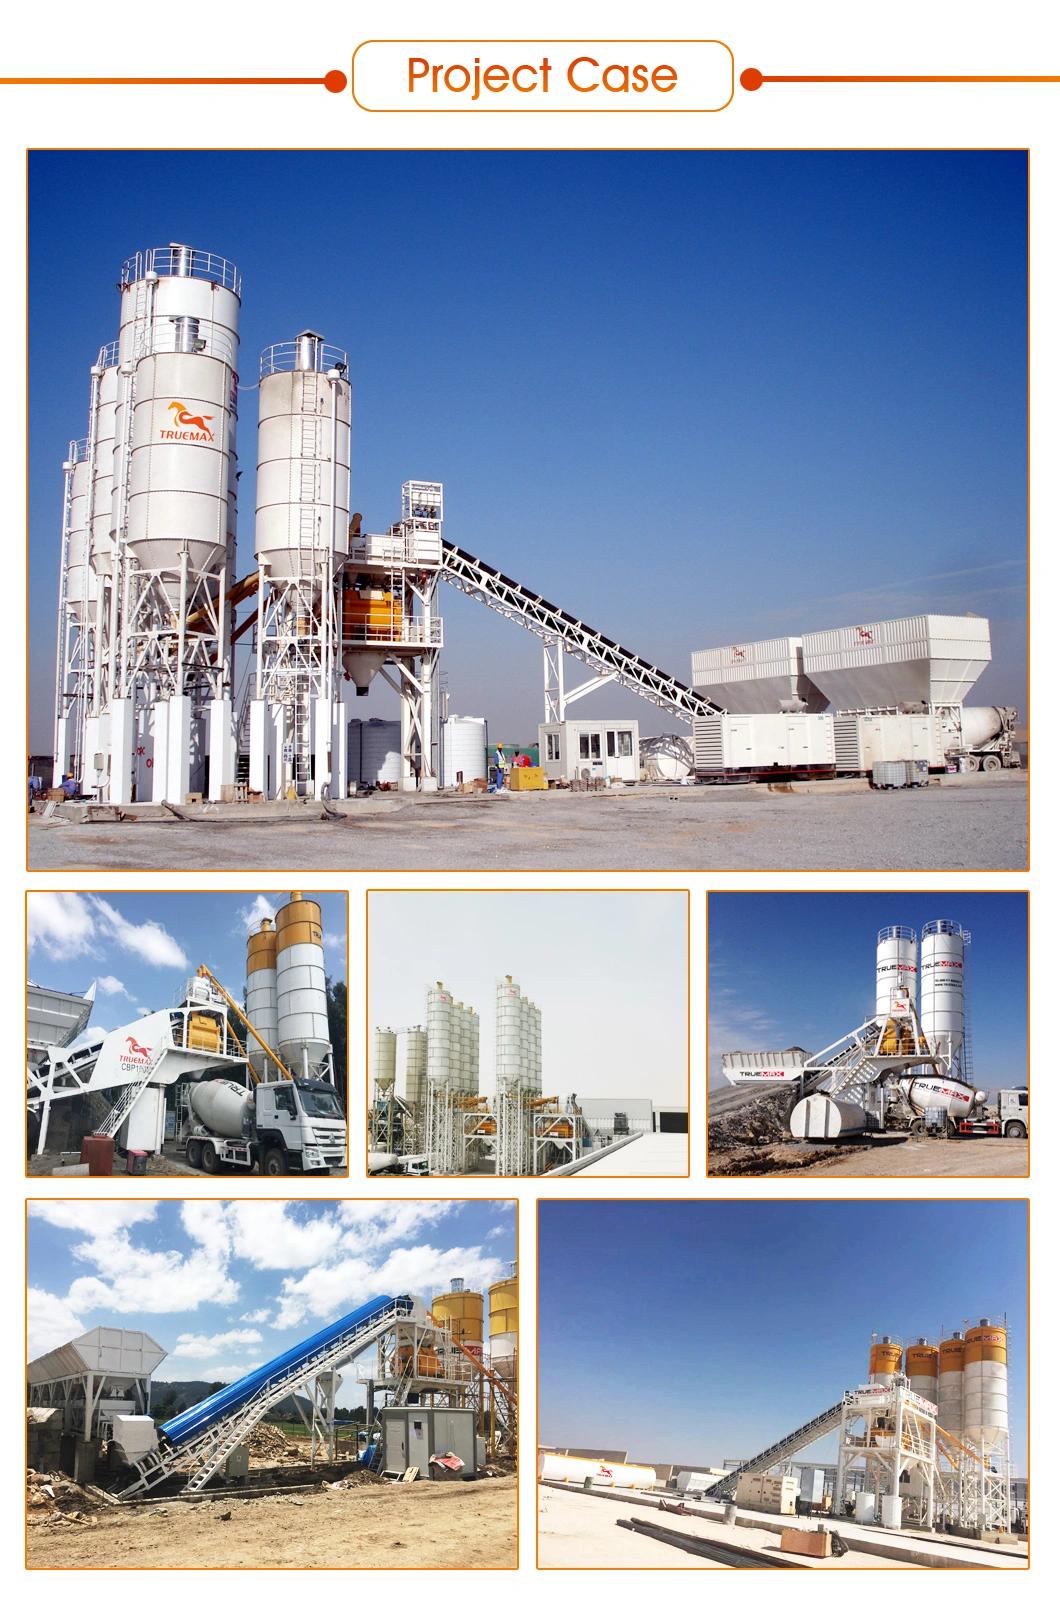 Italian Control System Mobile Cement Mixing Plant with Sicoma Mixer